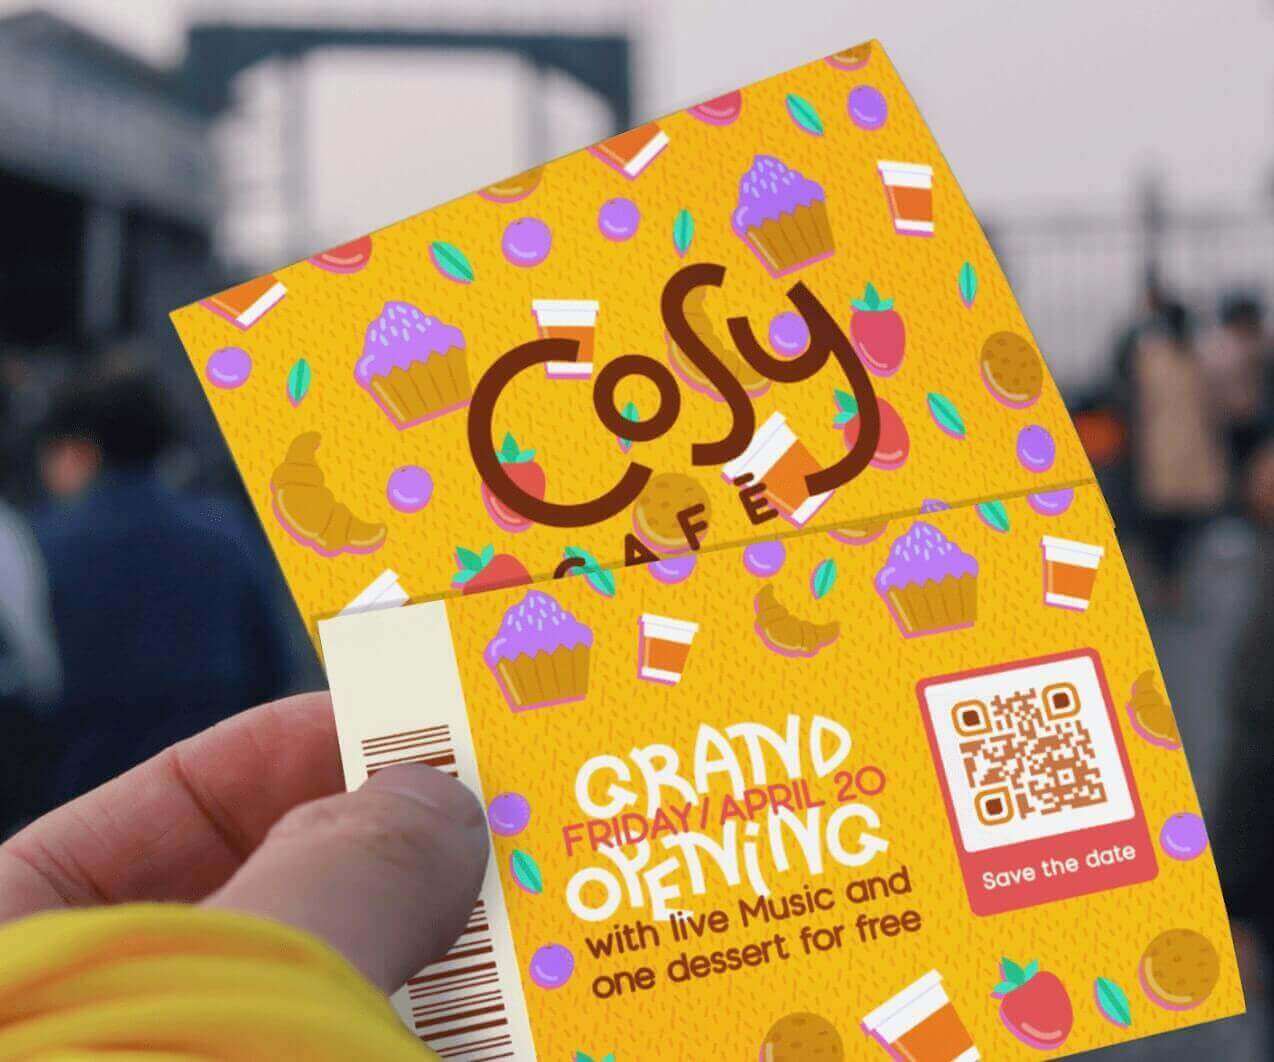 A person’s hand holding a yellow event ticket with a QR Code frame CTA to “Save the date”
